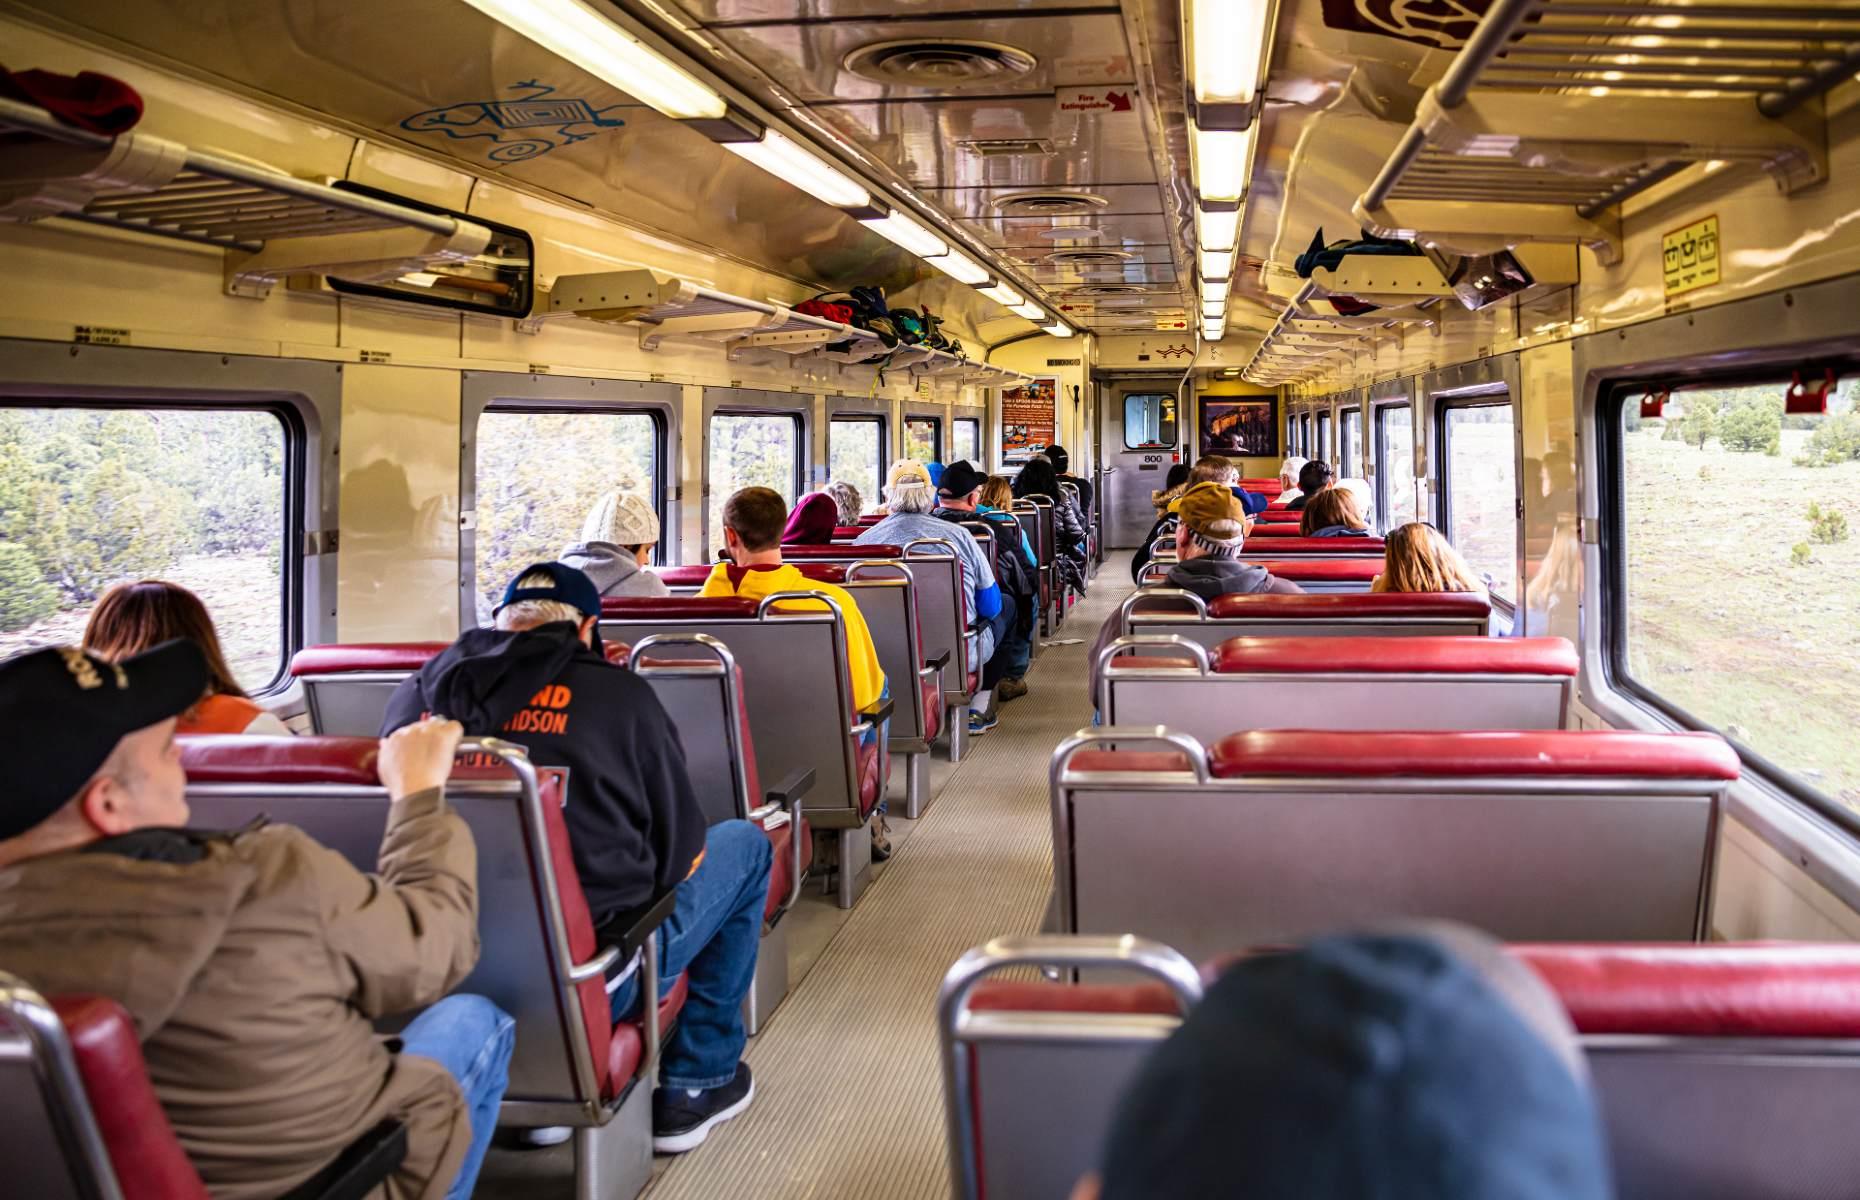 As scenic trips go, it’s a steal. One-way fares in Pullman Class start from just $33.50, Coach Class (pictured) is $41 each way, or to take in the scenery in style you can travel in a glass-ceiling observation dome car from $94.50 each way. During the journey, passengers are encouraged to get into the spirit of the Old West and enjoy the musical entertainment, cowboy characters and other surprises onboard.